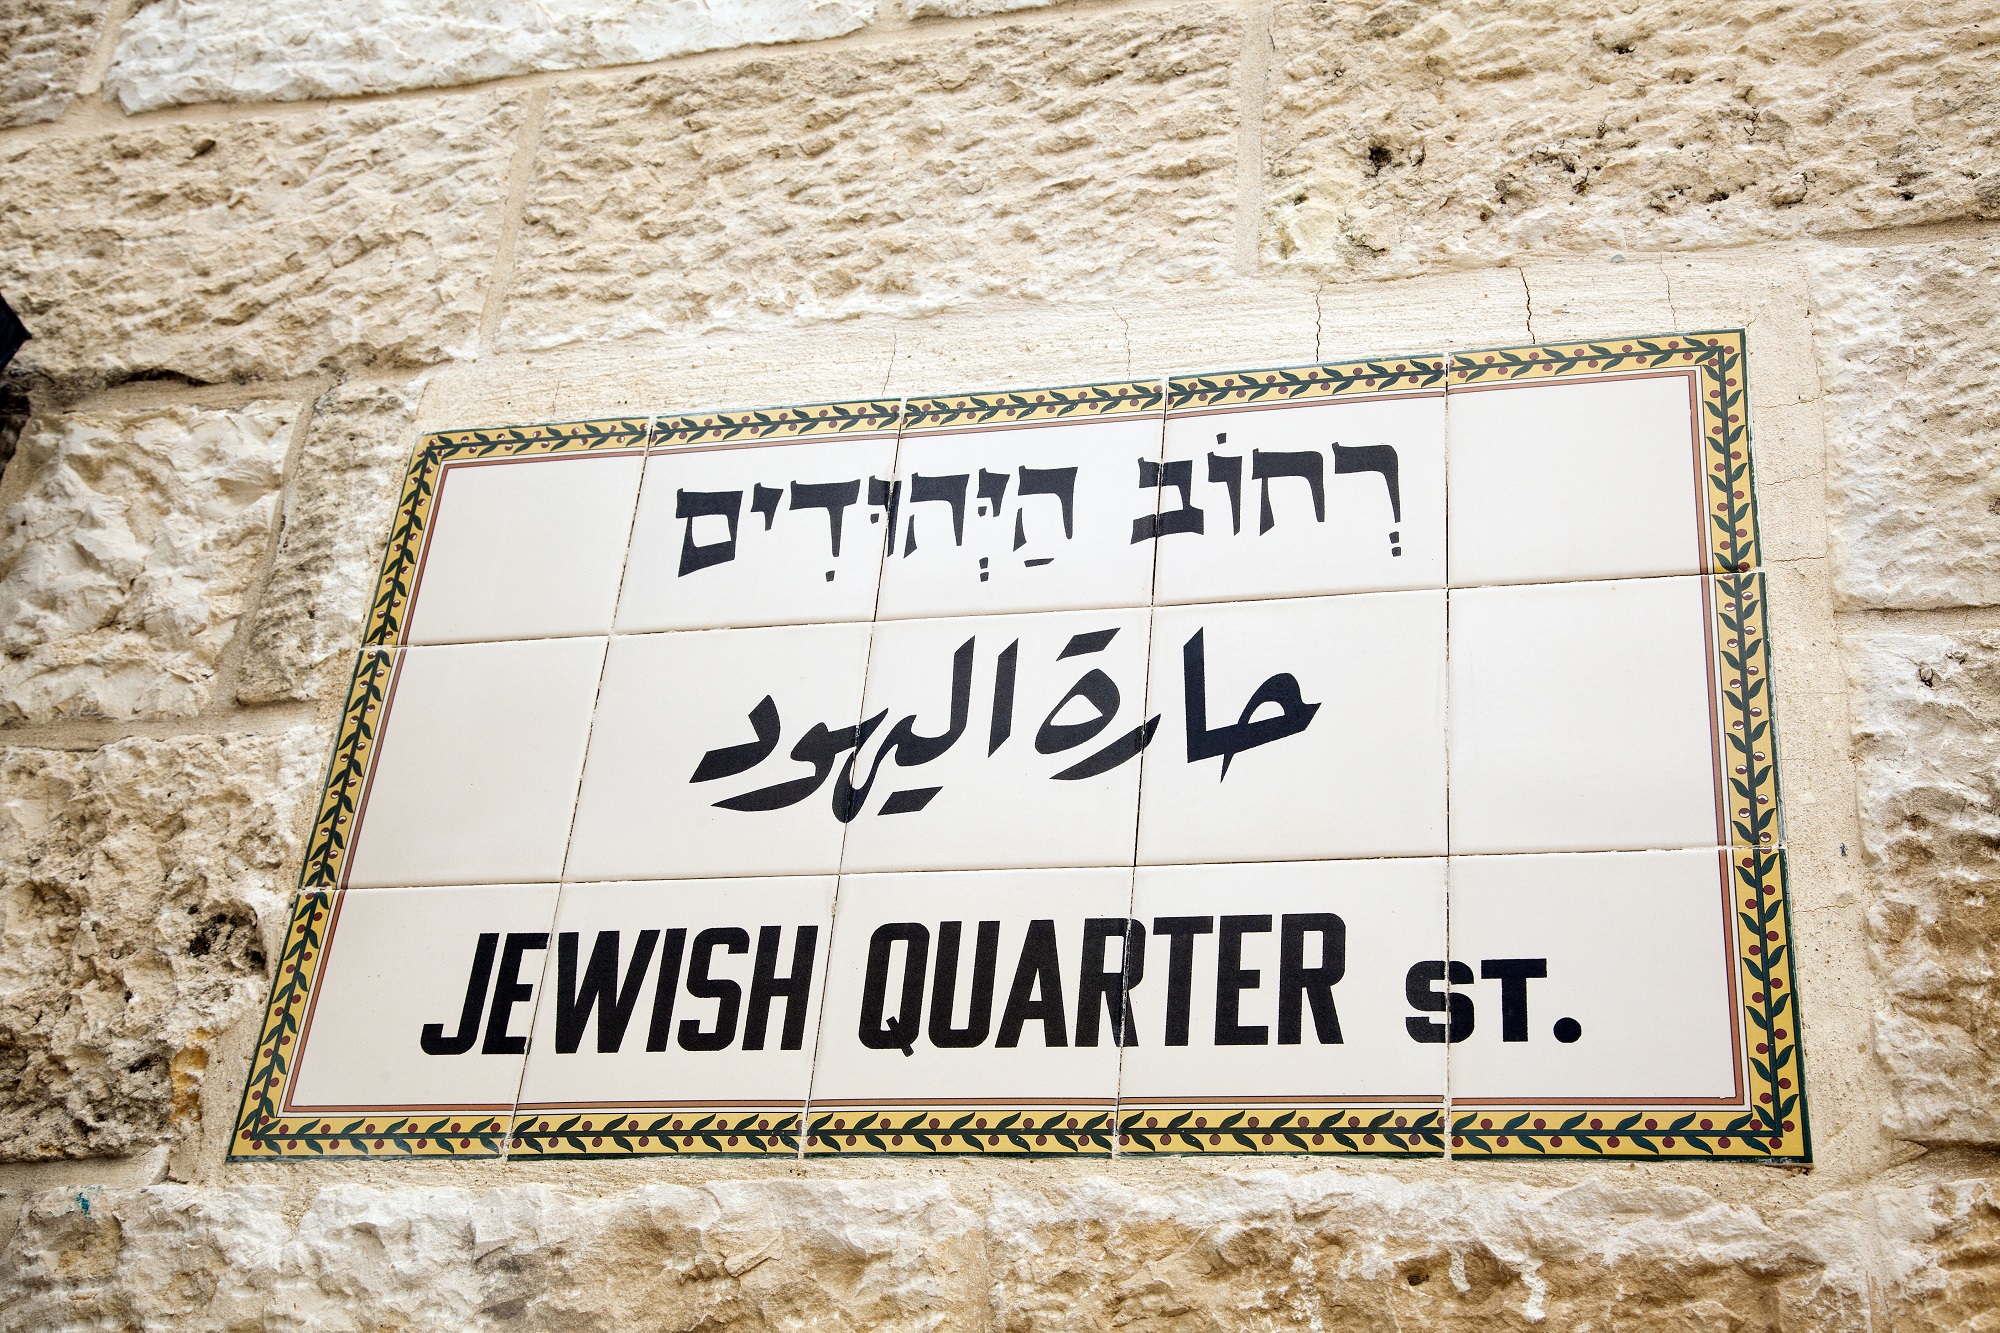 The Jewish Quarter in the Old City of Jerusalem